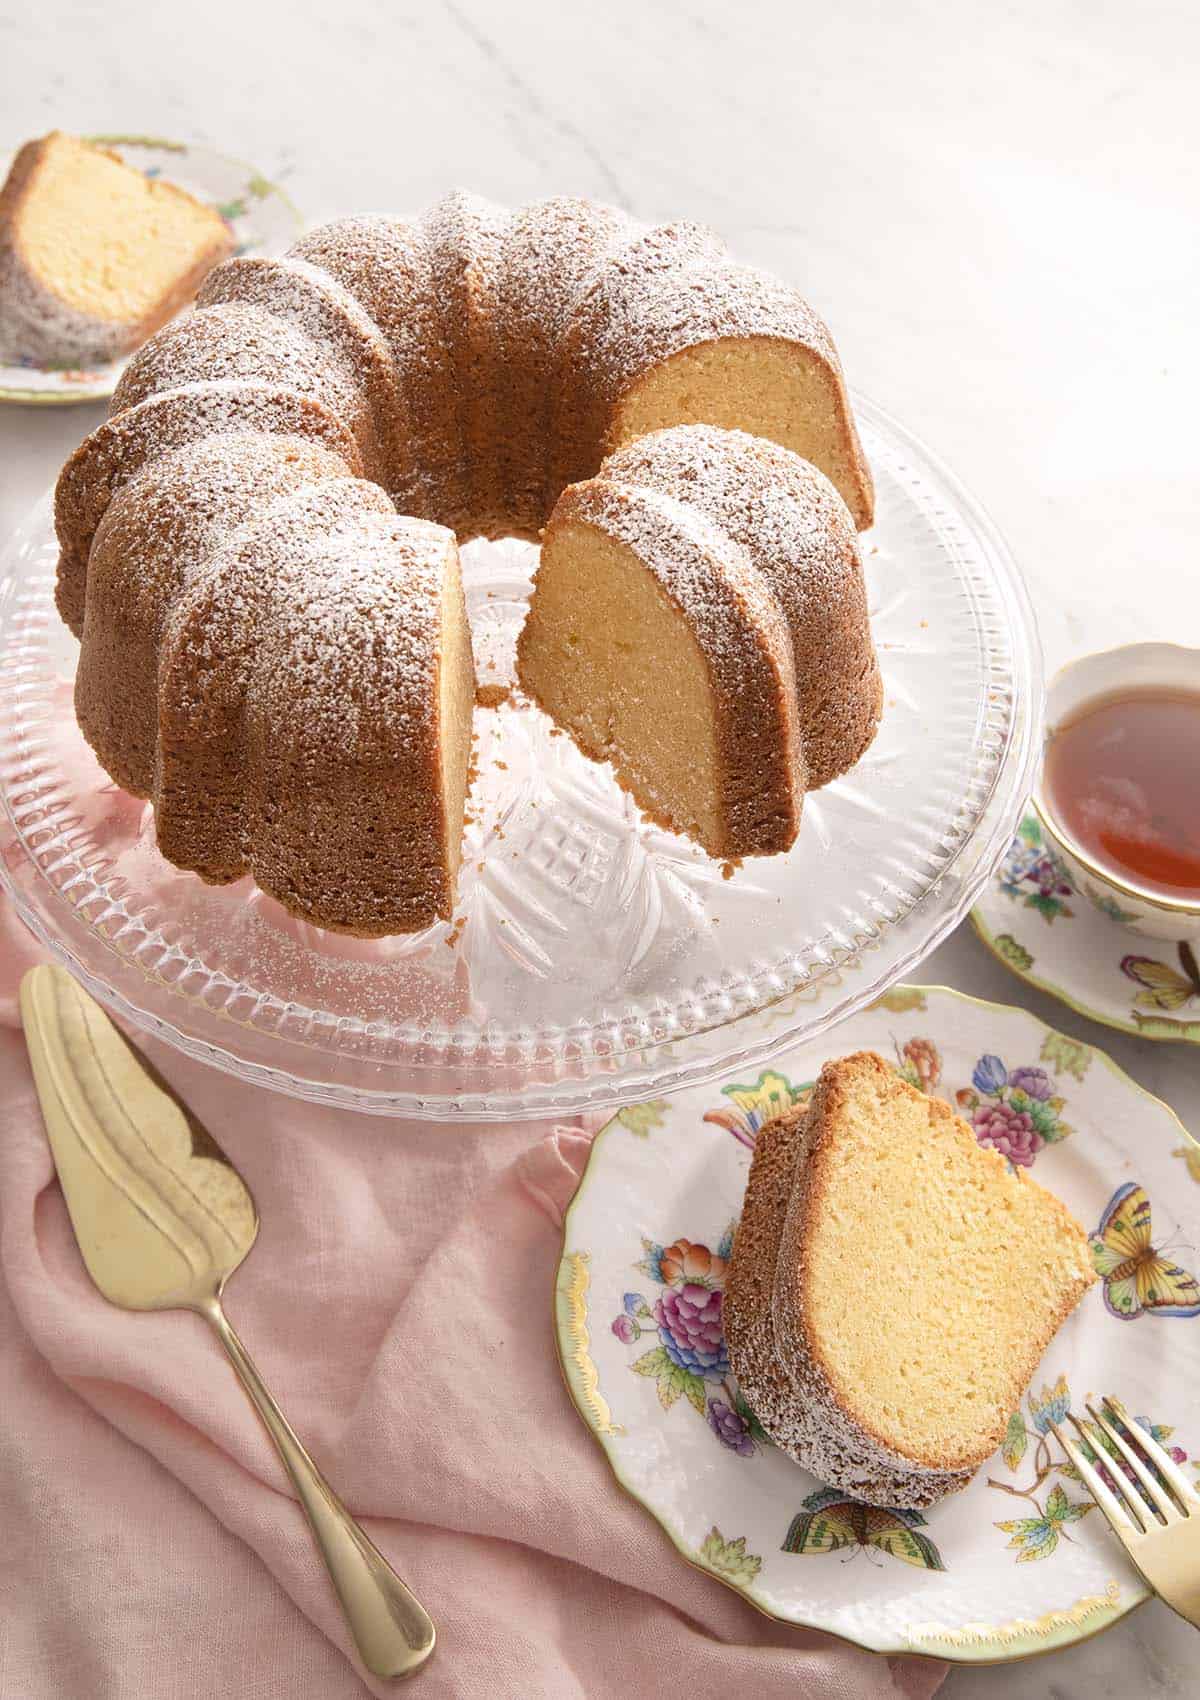 A sour cream pound cake on a cake stand with a slice on a plate